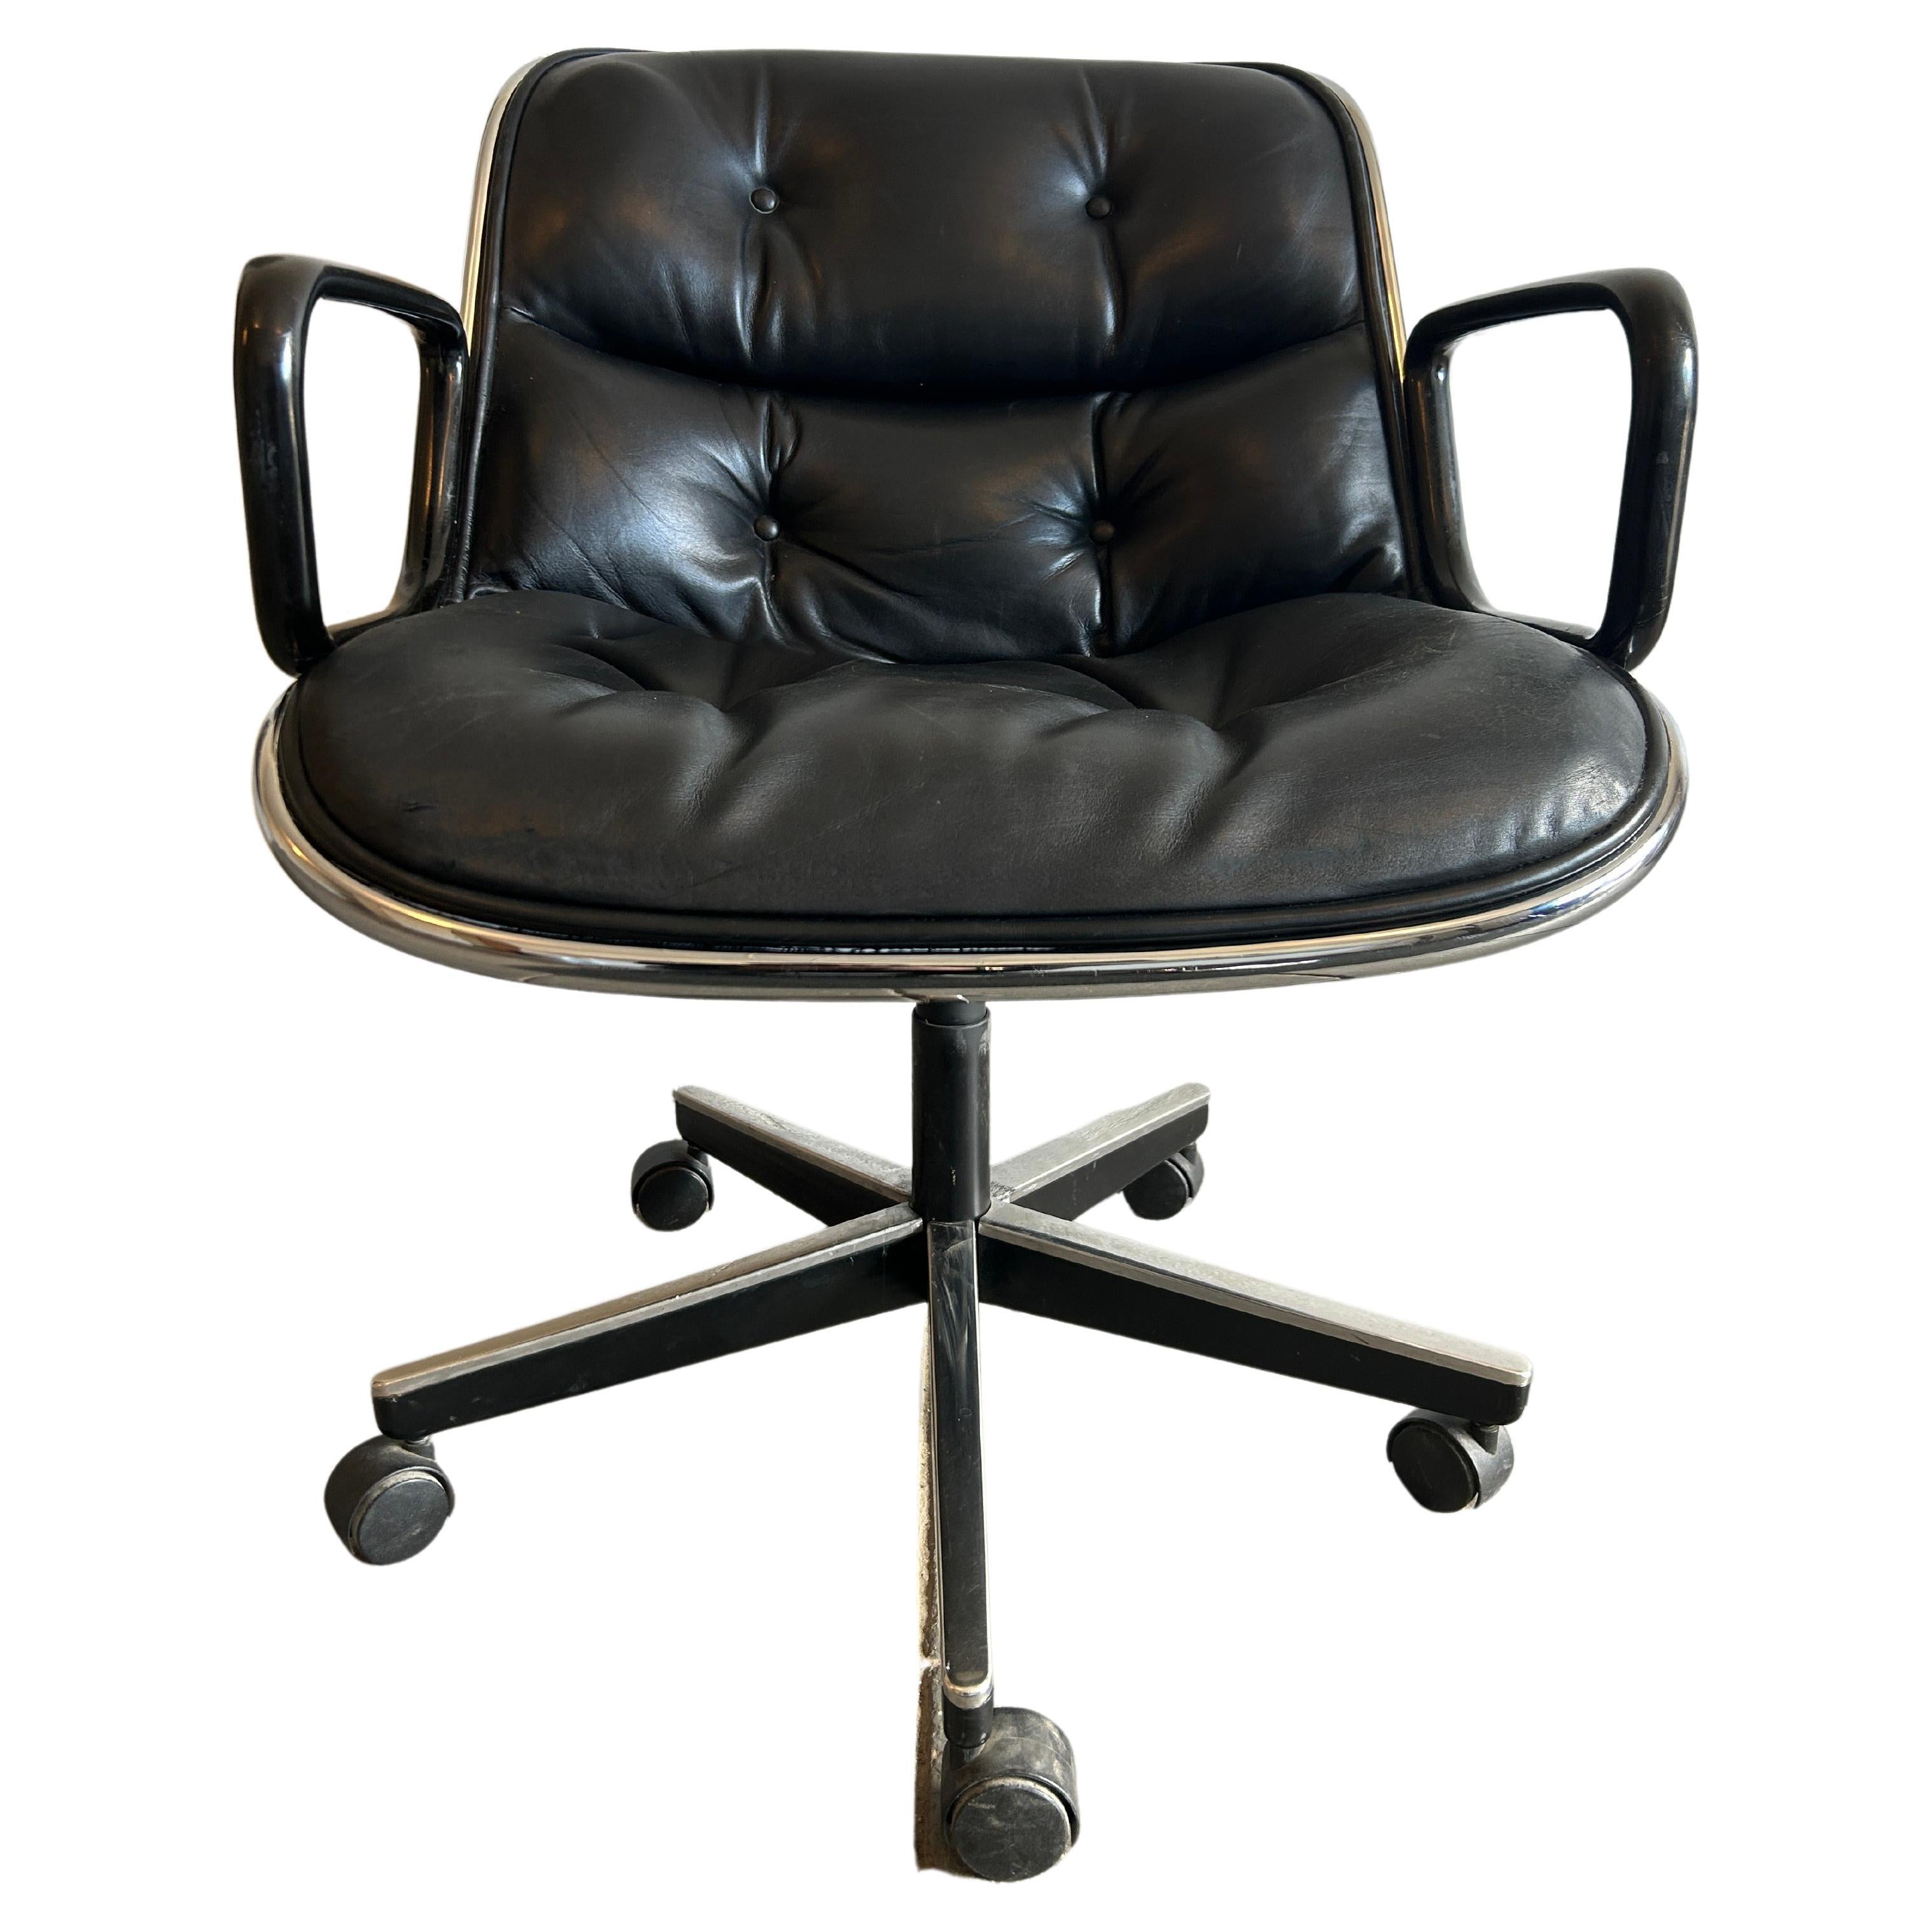 Mid-Century Modern Charles Pollock Executive Chair for Knoll in Black Leather